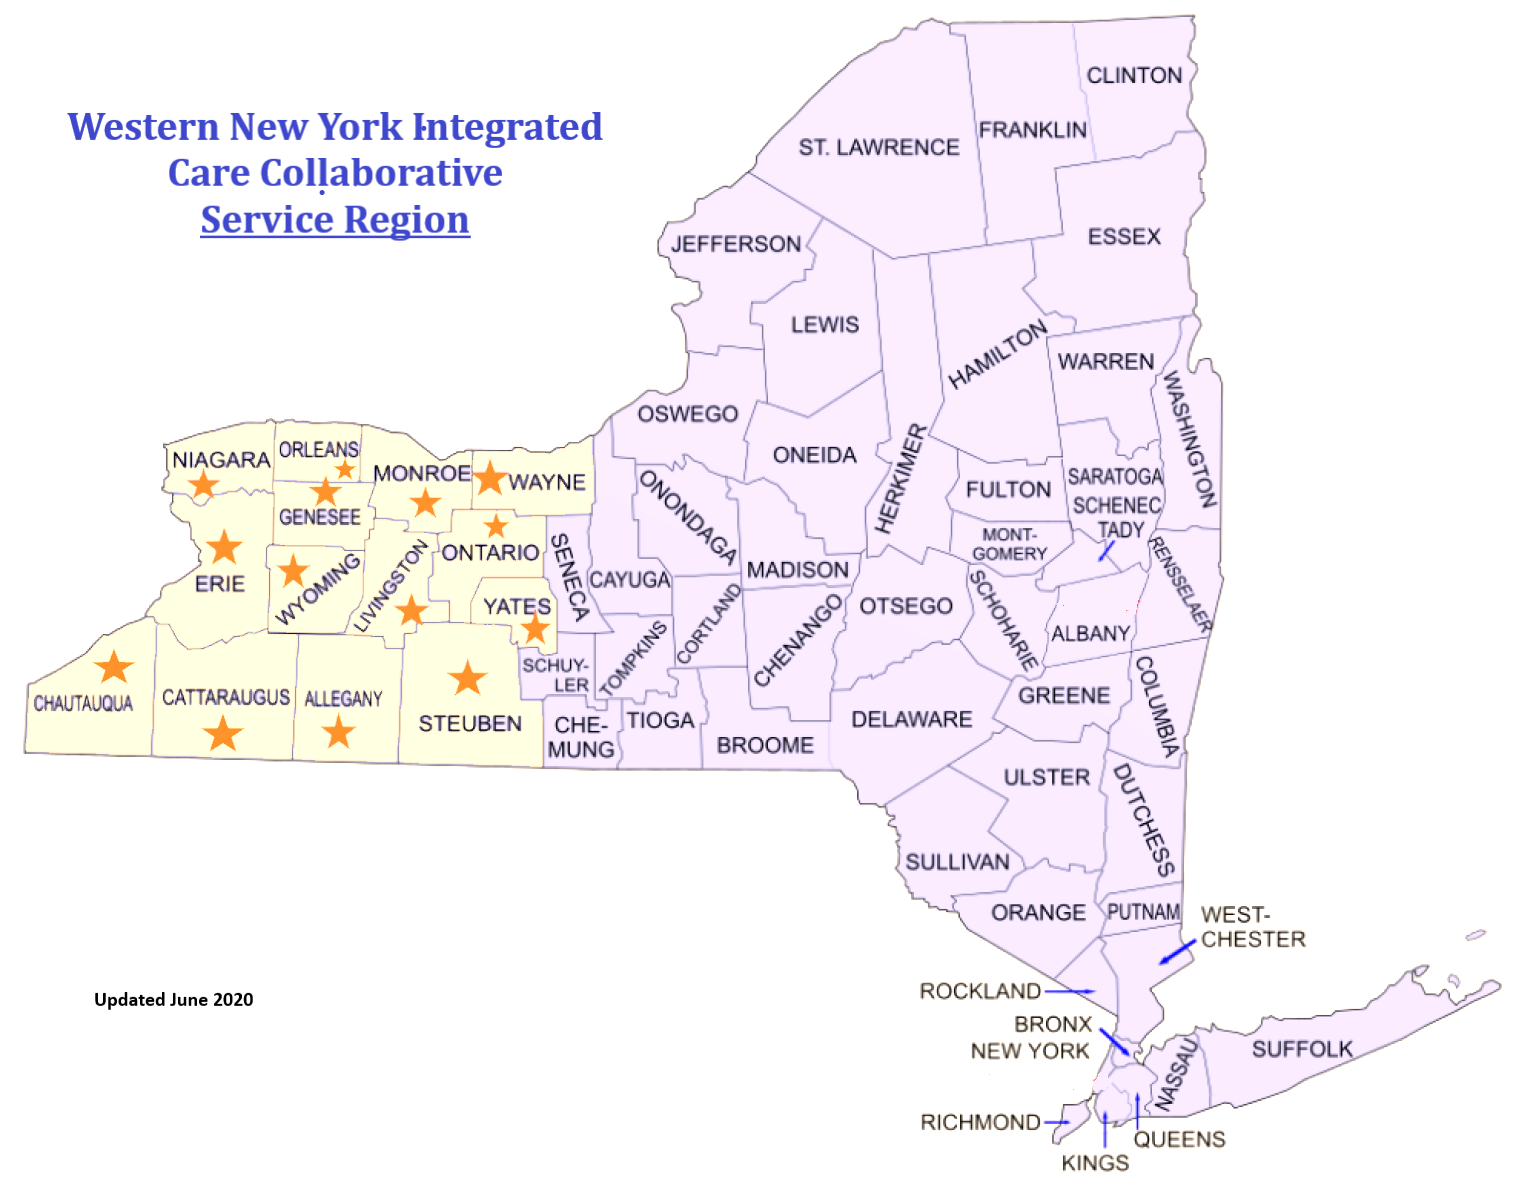 WNYICC Service areas map